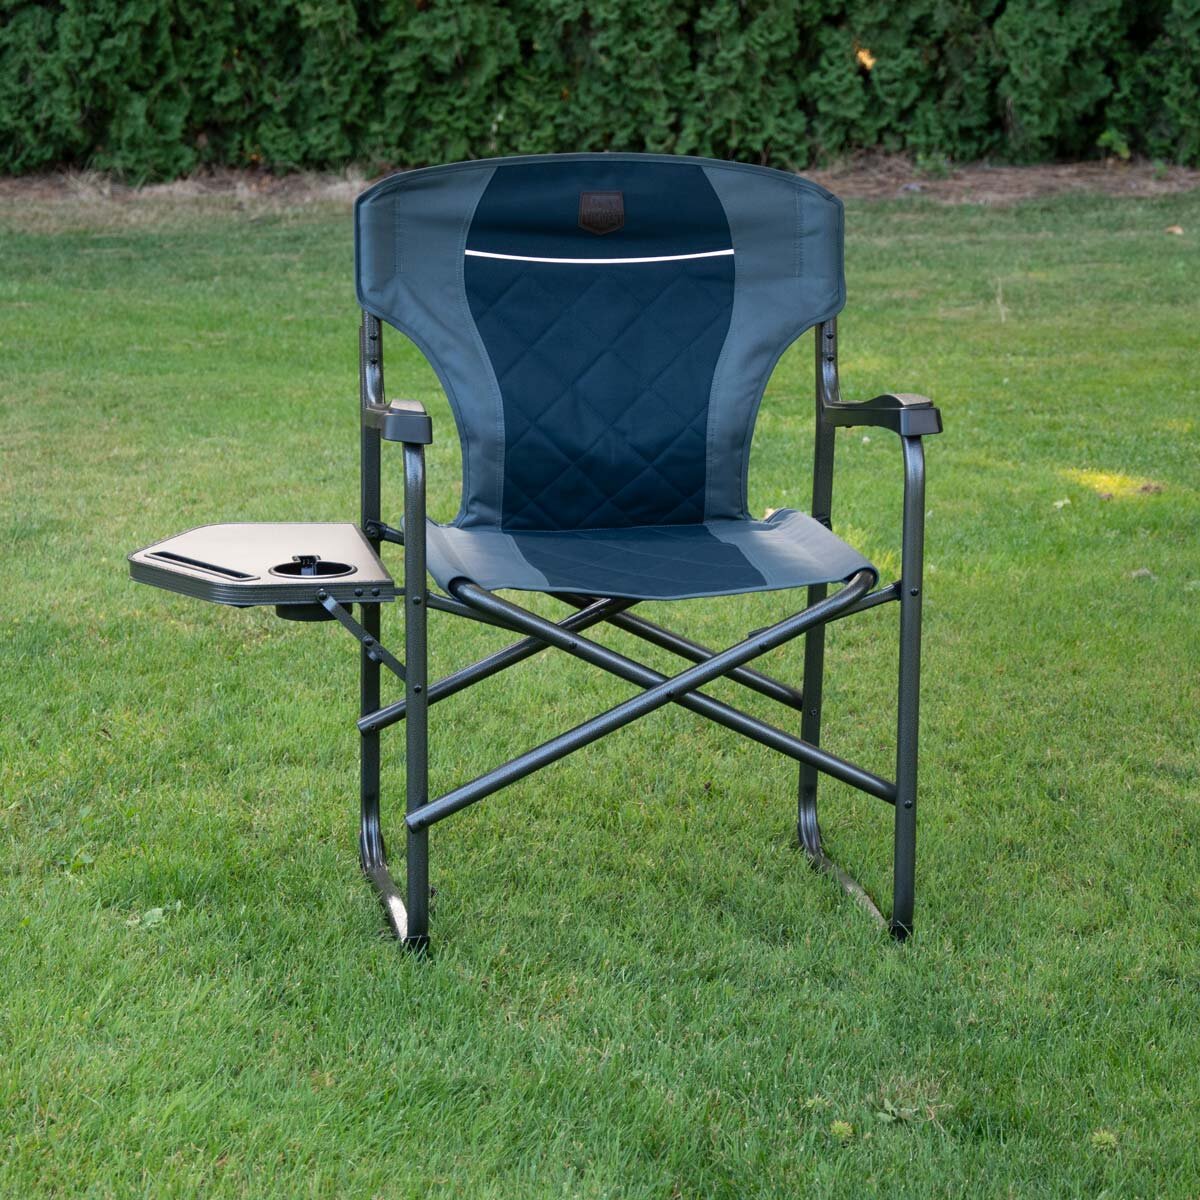 Timber Ridge Outdoor Director's Chair with Side Table